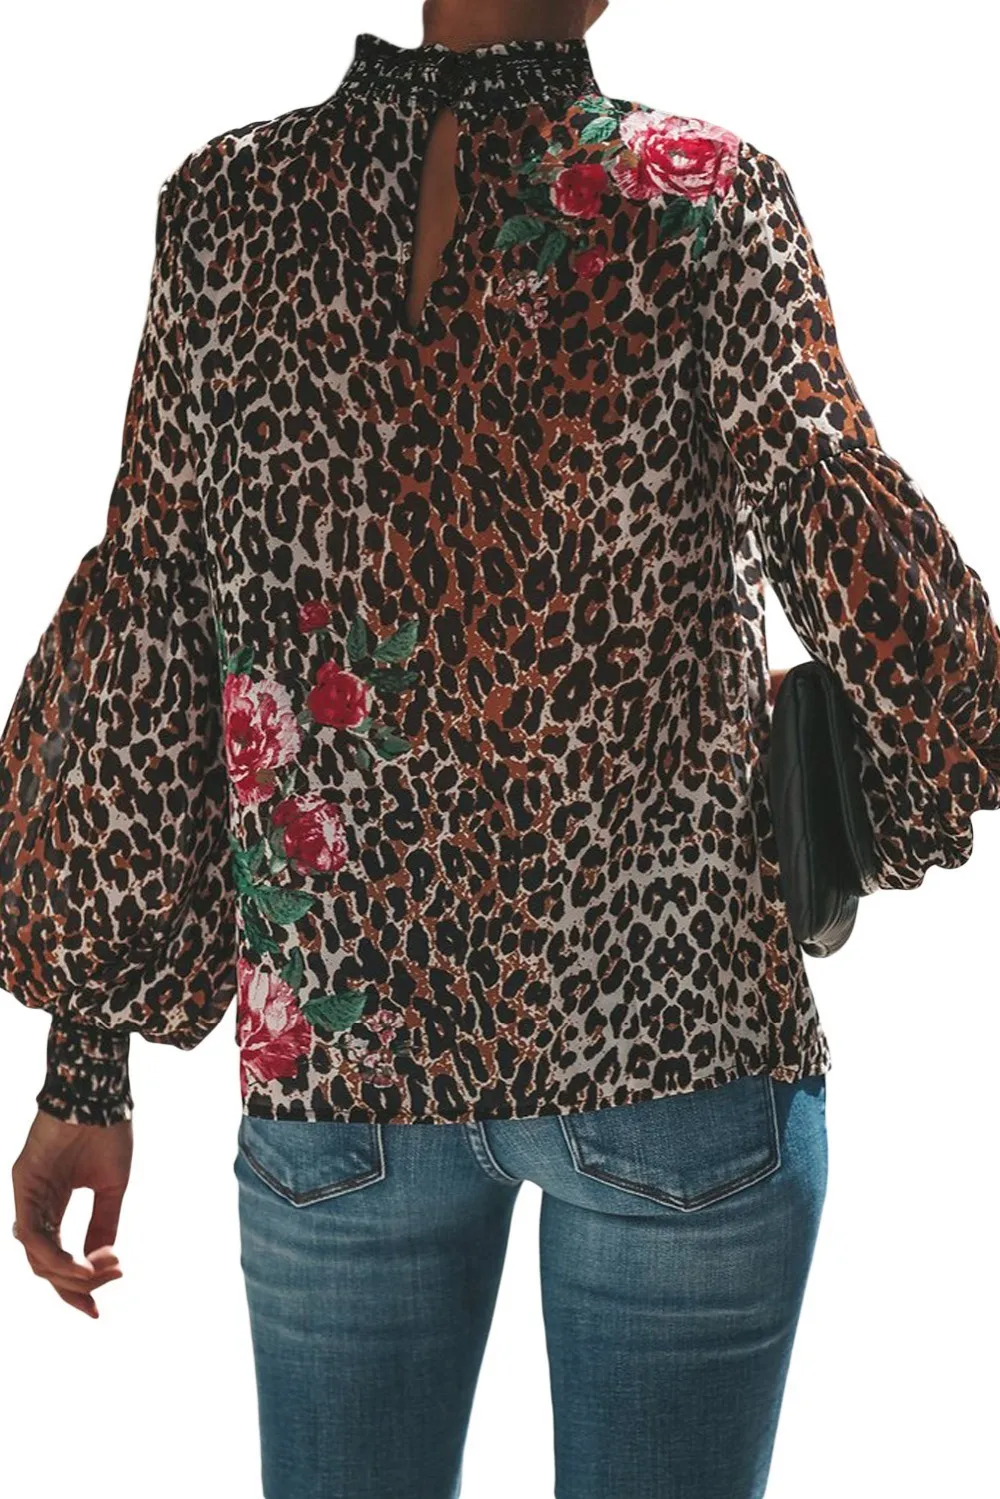 Leopard-Peony-Print-Smocked-Long-Sleeve-Blouse-LC251632-20-2